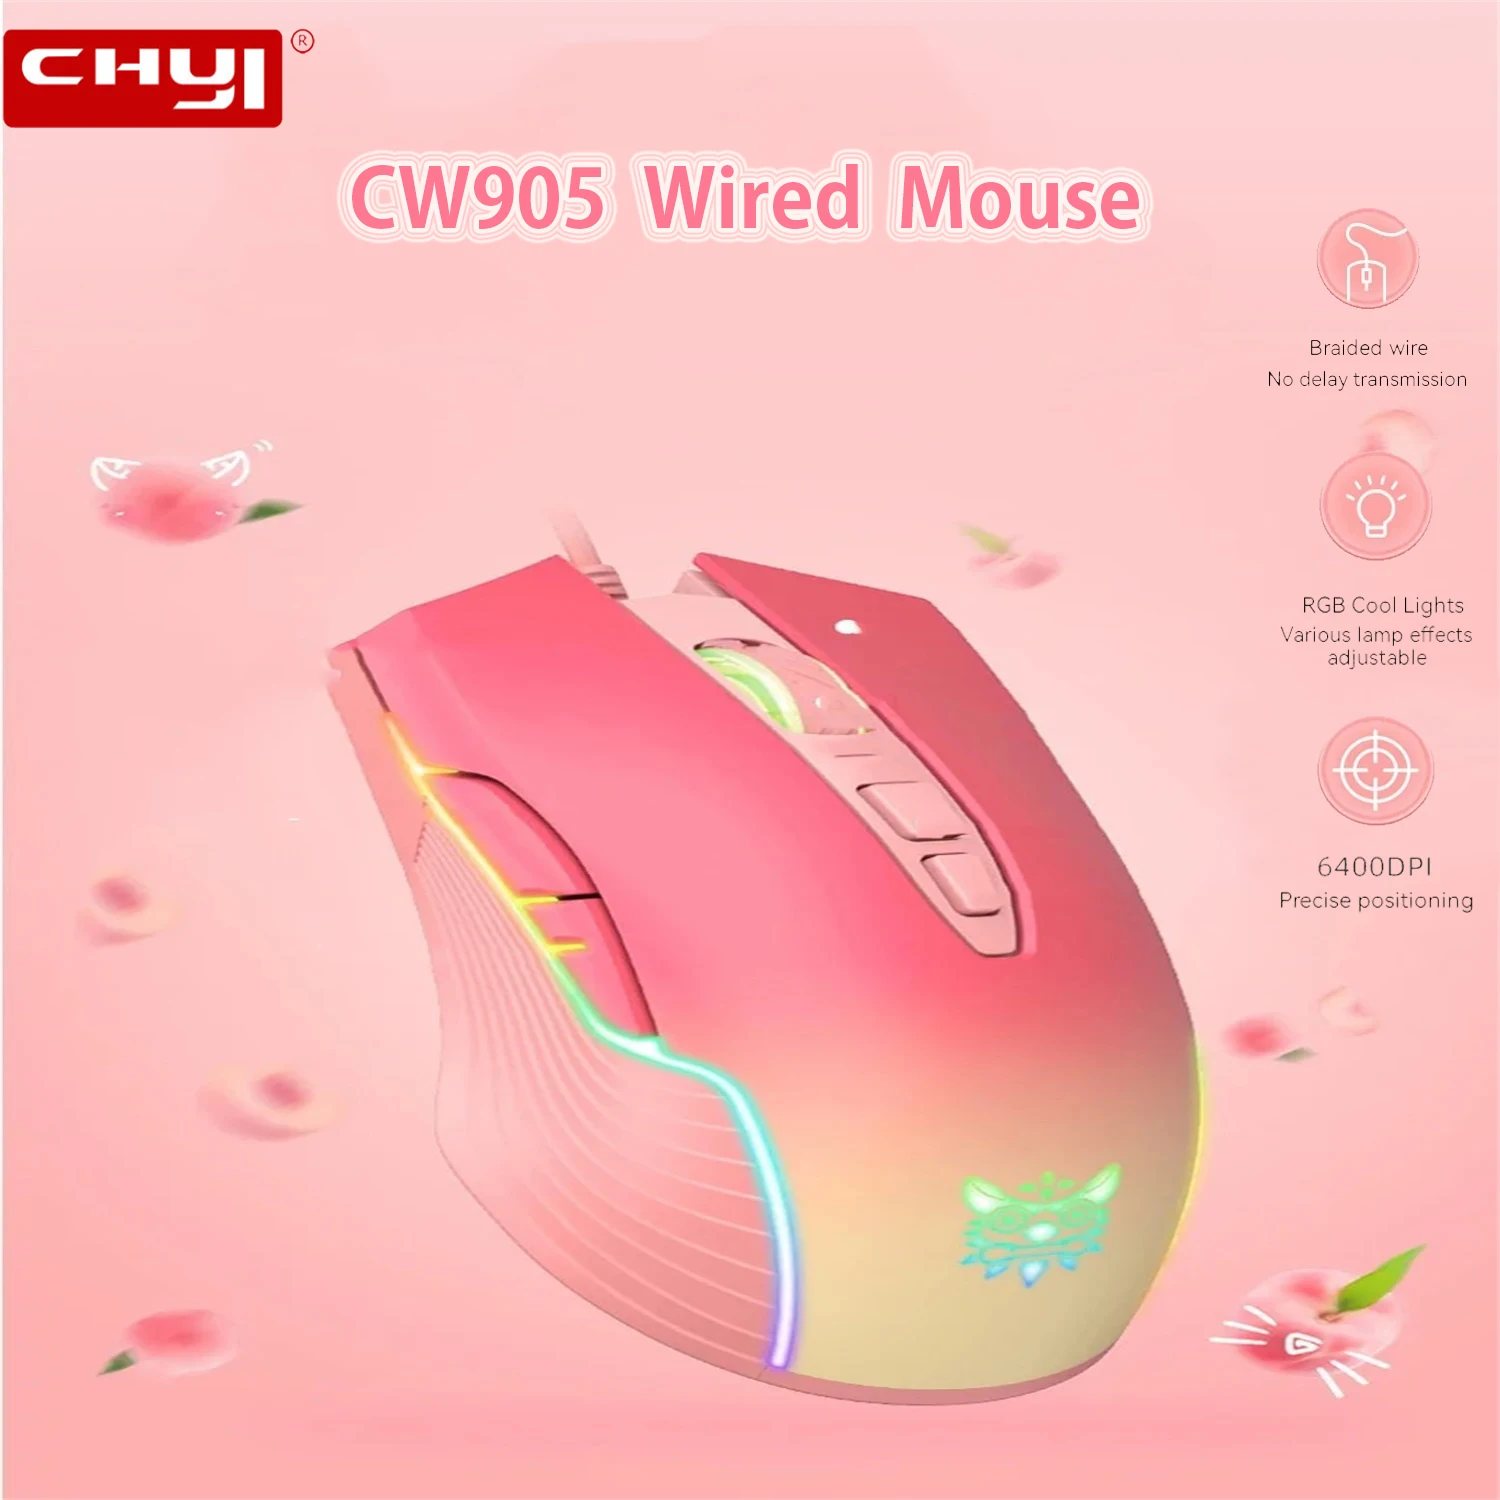 

CW905 Esports Game 6400DPI Wired Mouse RGB Color Light Effect Ergonomic Design Suitable for Laptop Desktop Office Gaming Mouse